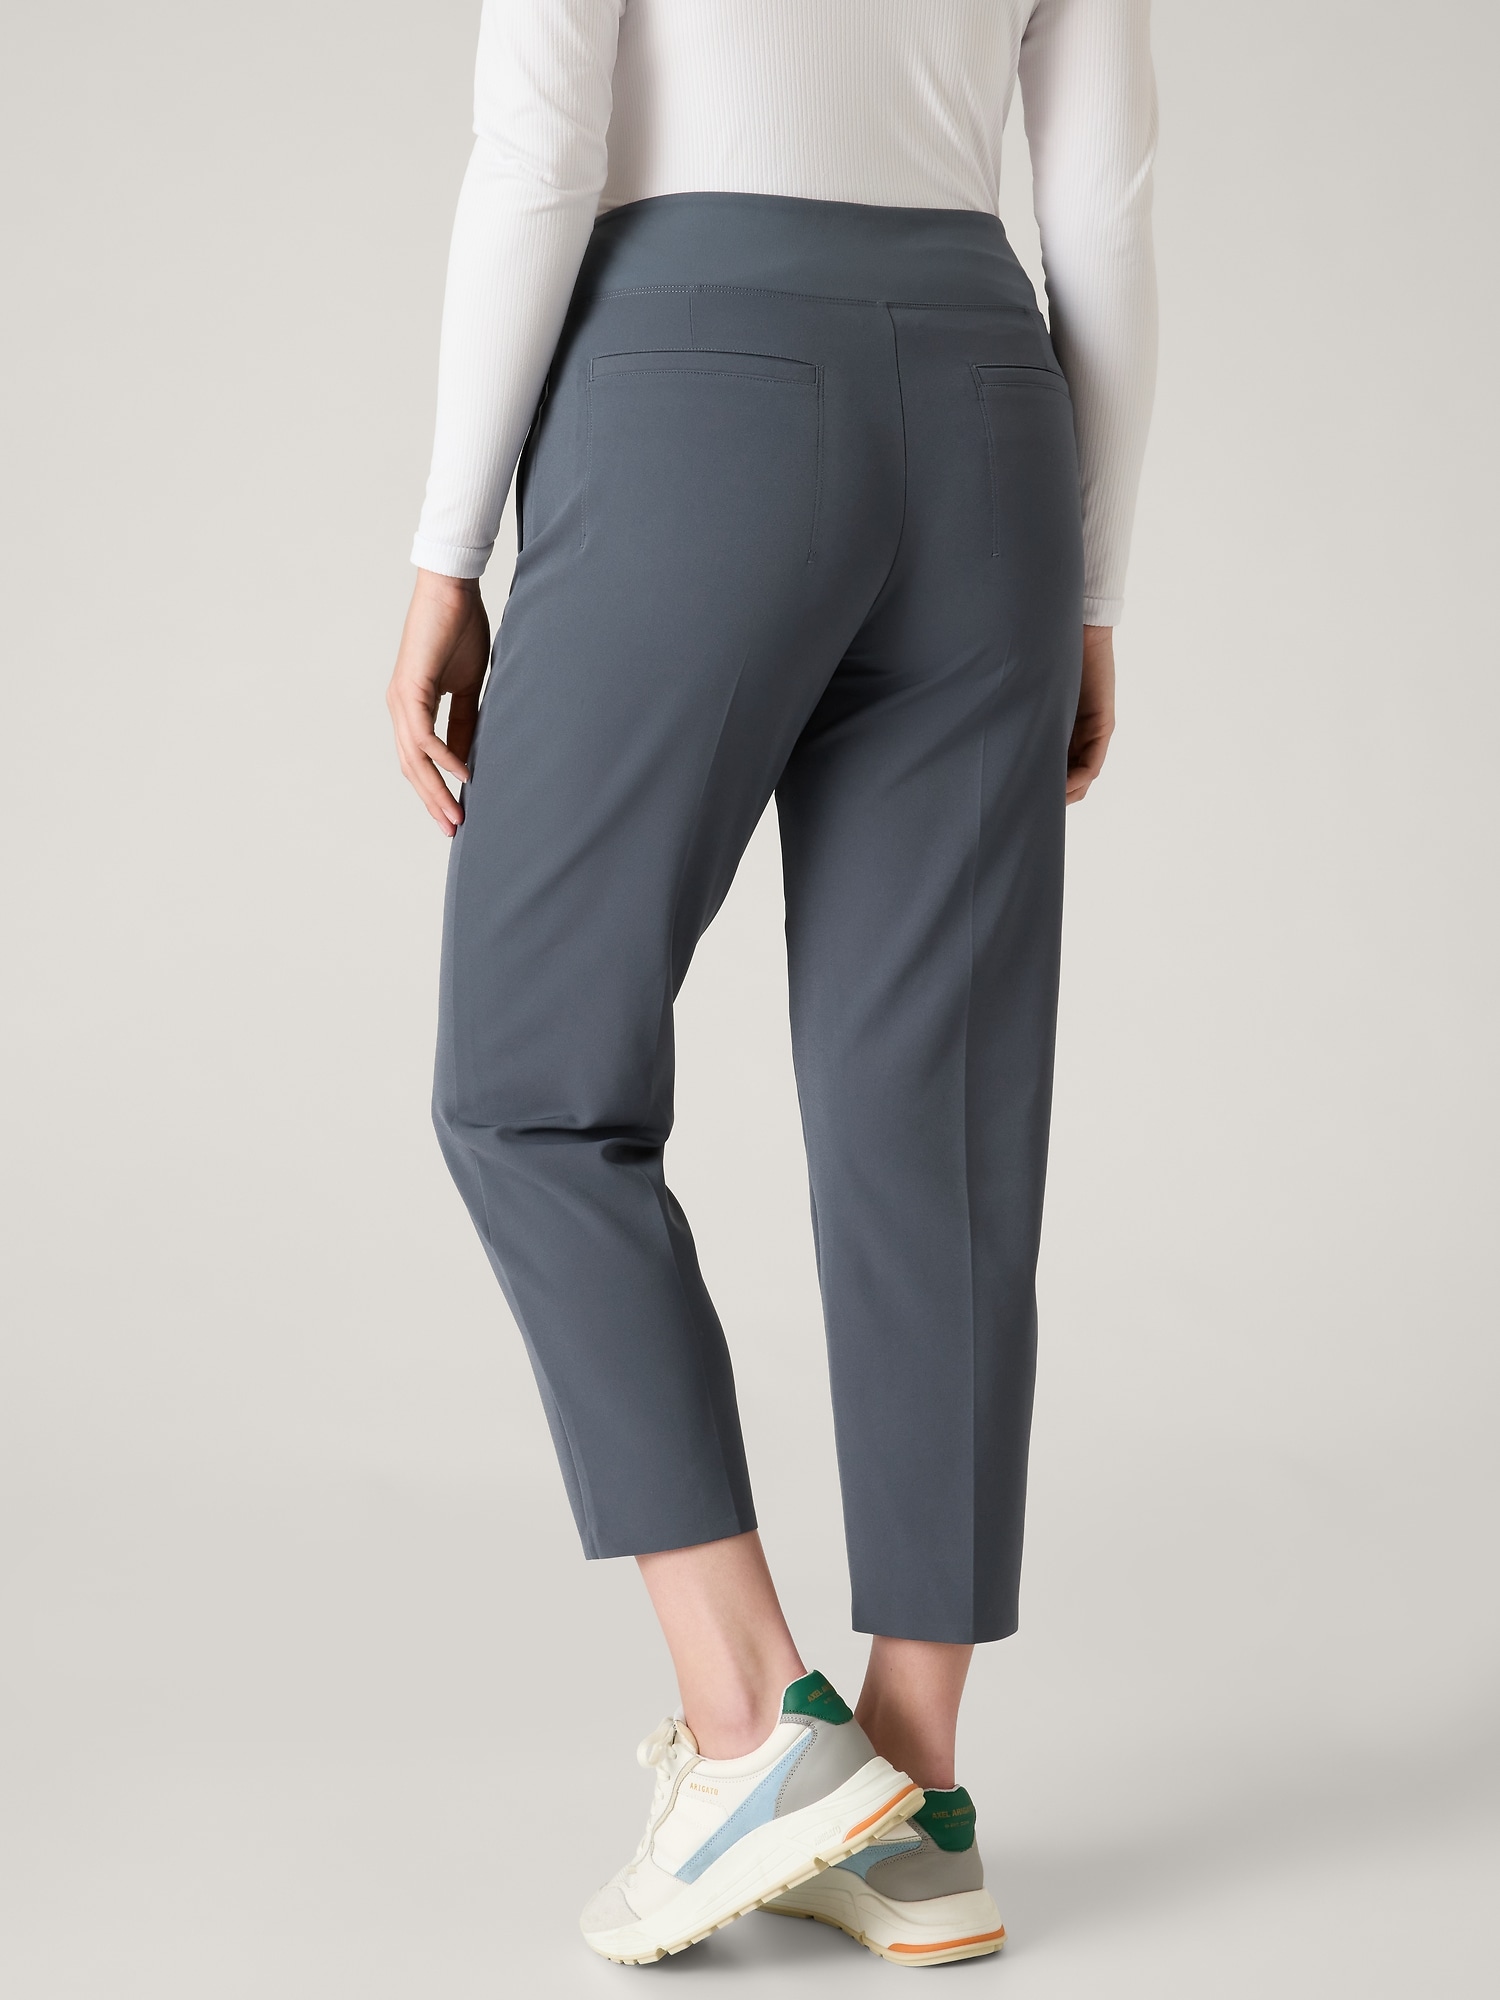 NEW A new day gray high rise straight hip/thigh ankle pants